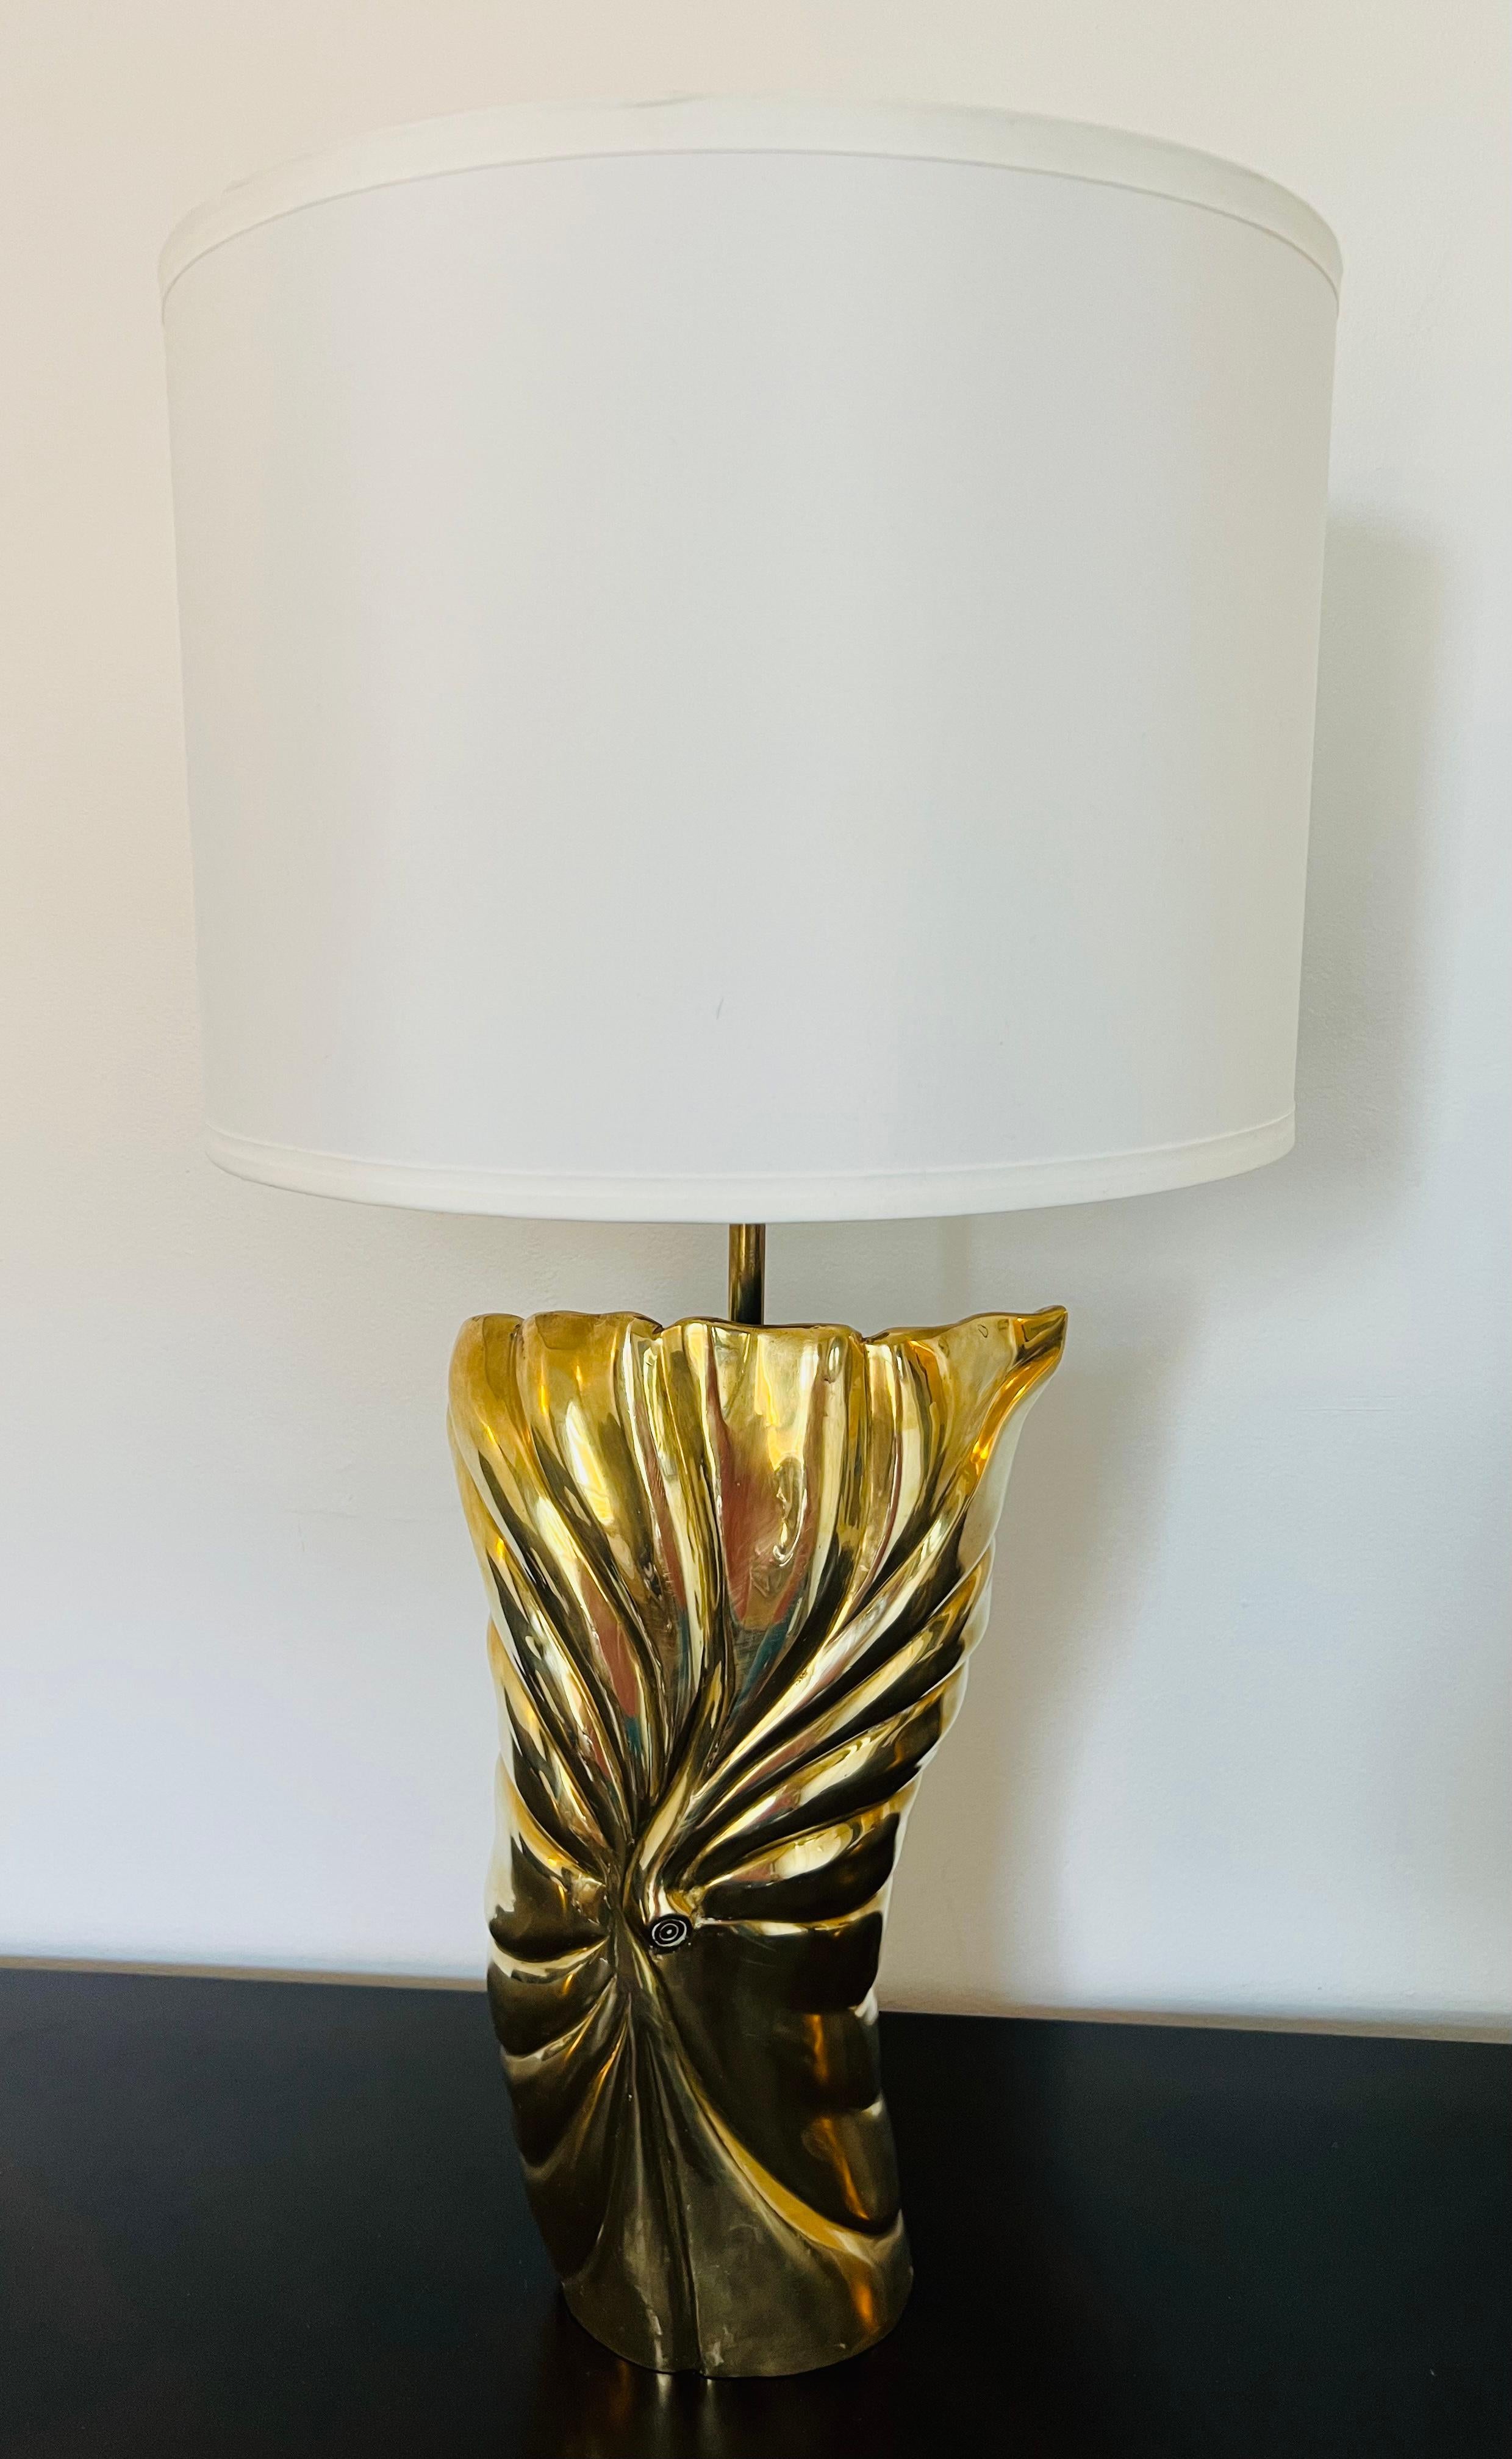 American Chapman Lighting 1980s Sculptural Table Lamp In Excellent Condition For Sale In New York, NY